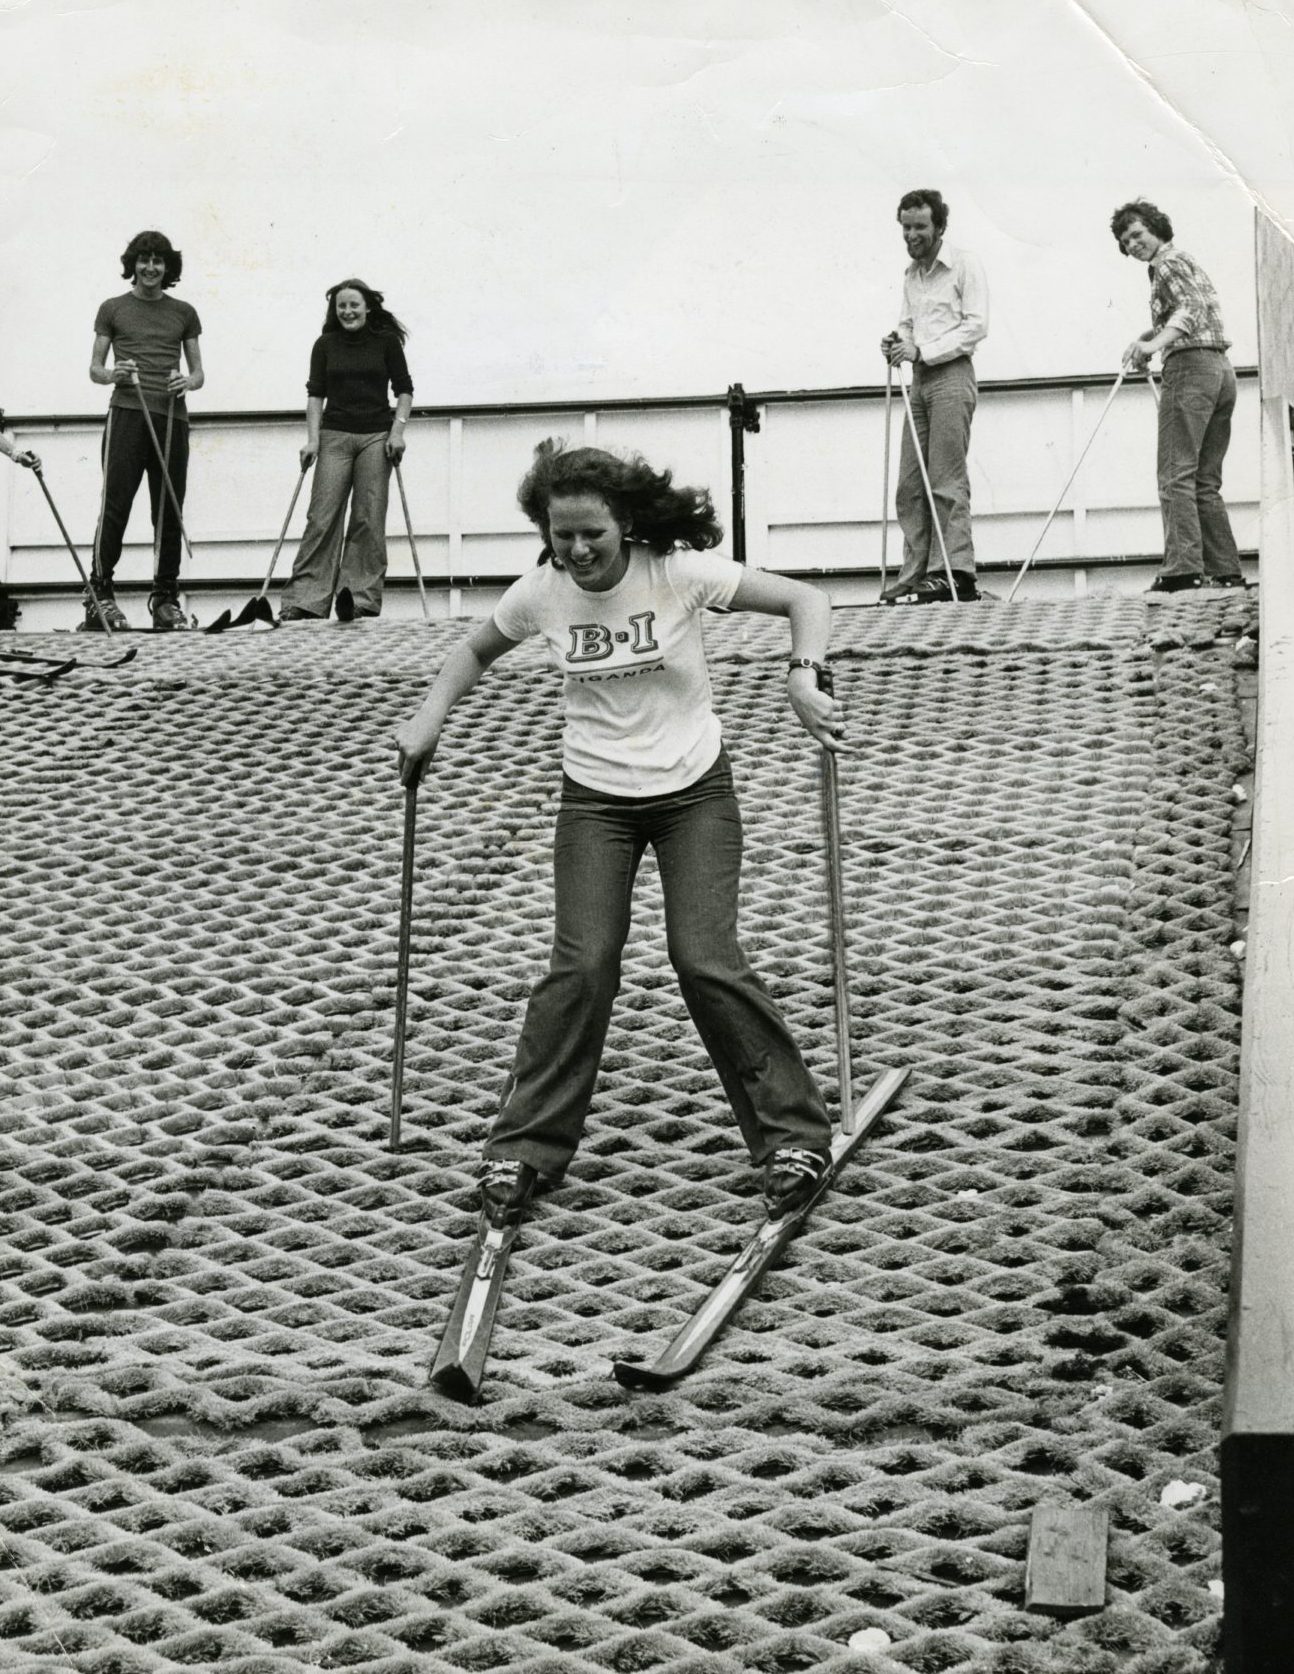 A woman skiis down the dry slope at the Ancrum Road Centre in Dundee in 1976